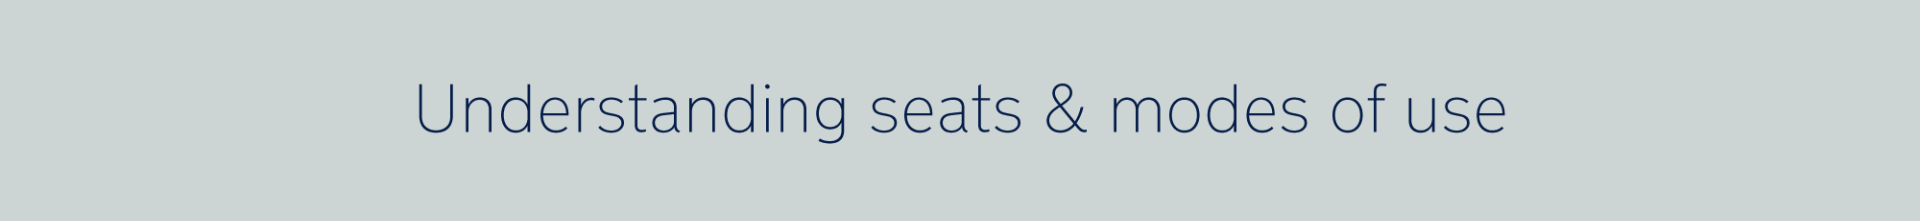 Understanding seats and modes of use